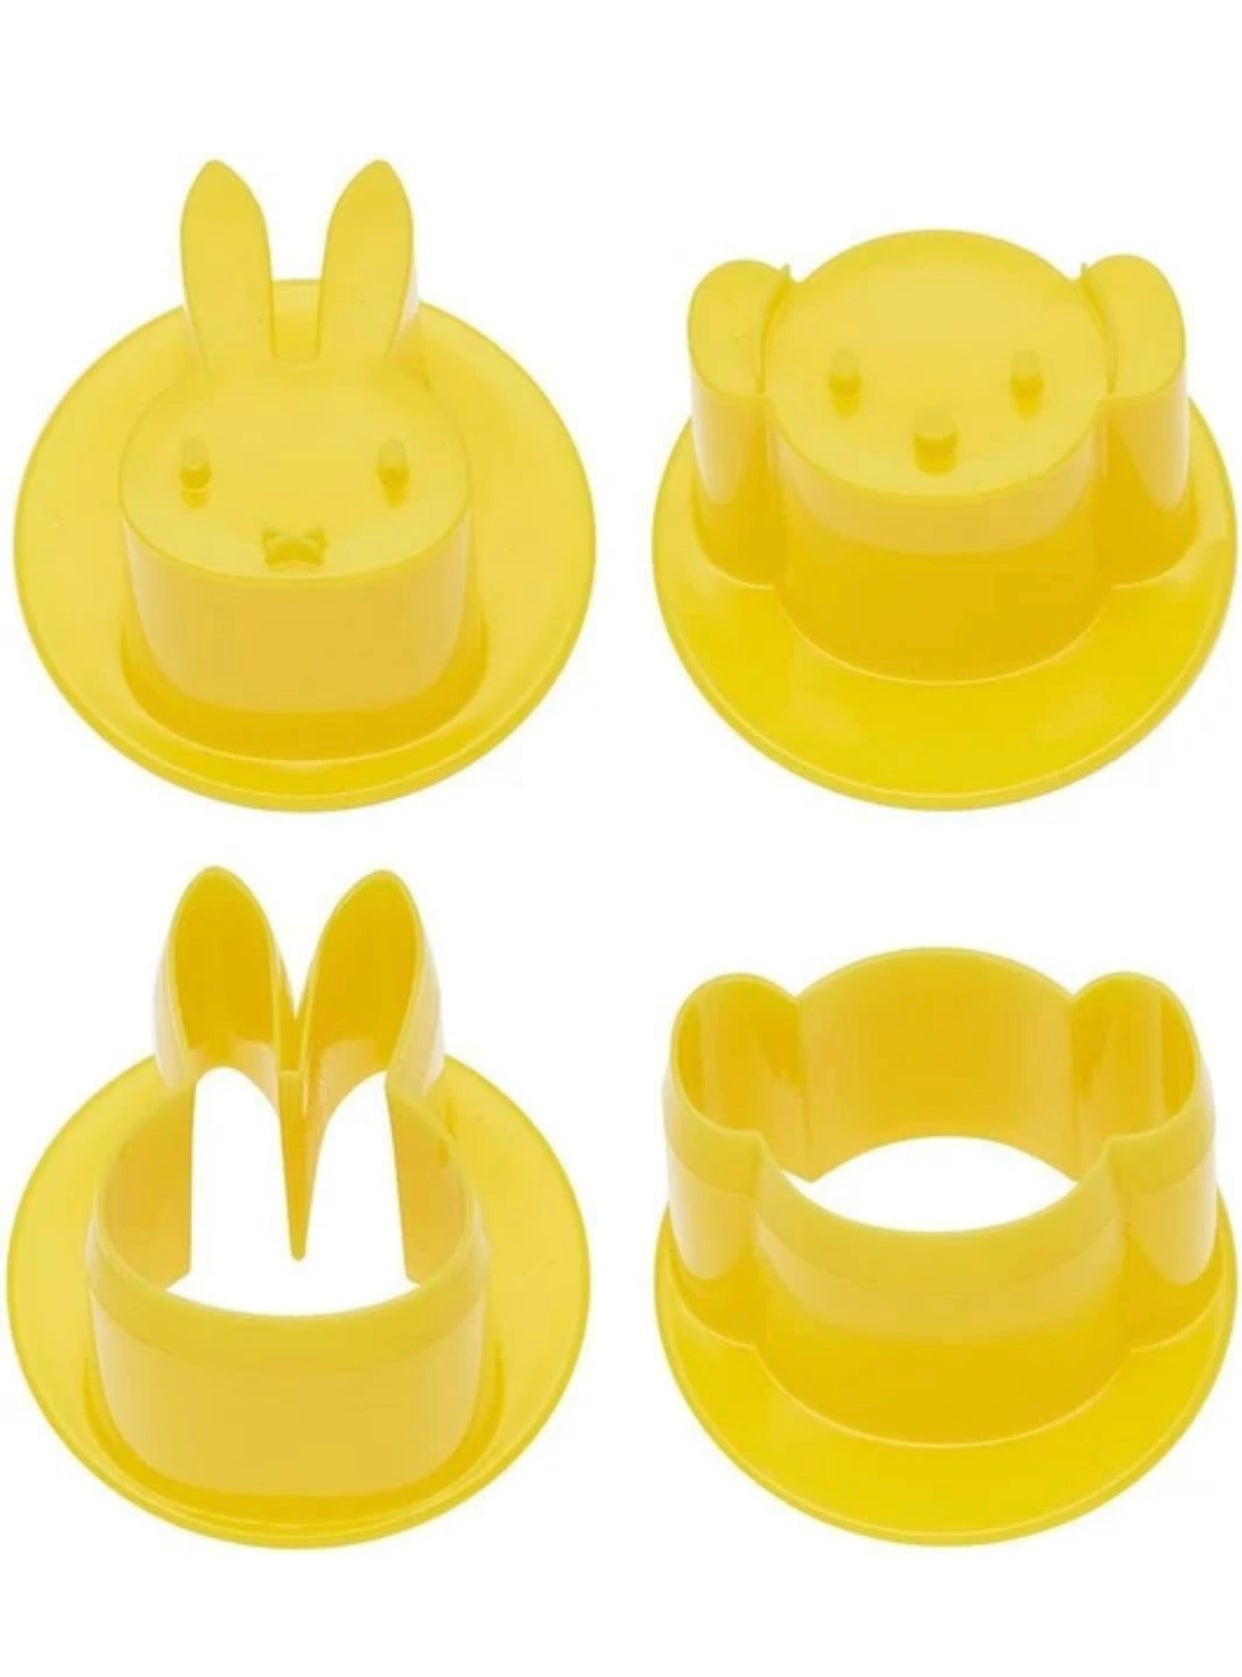 Miffy Vegetable and Cookie Cutter